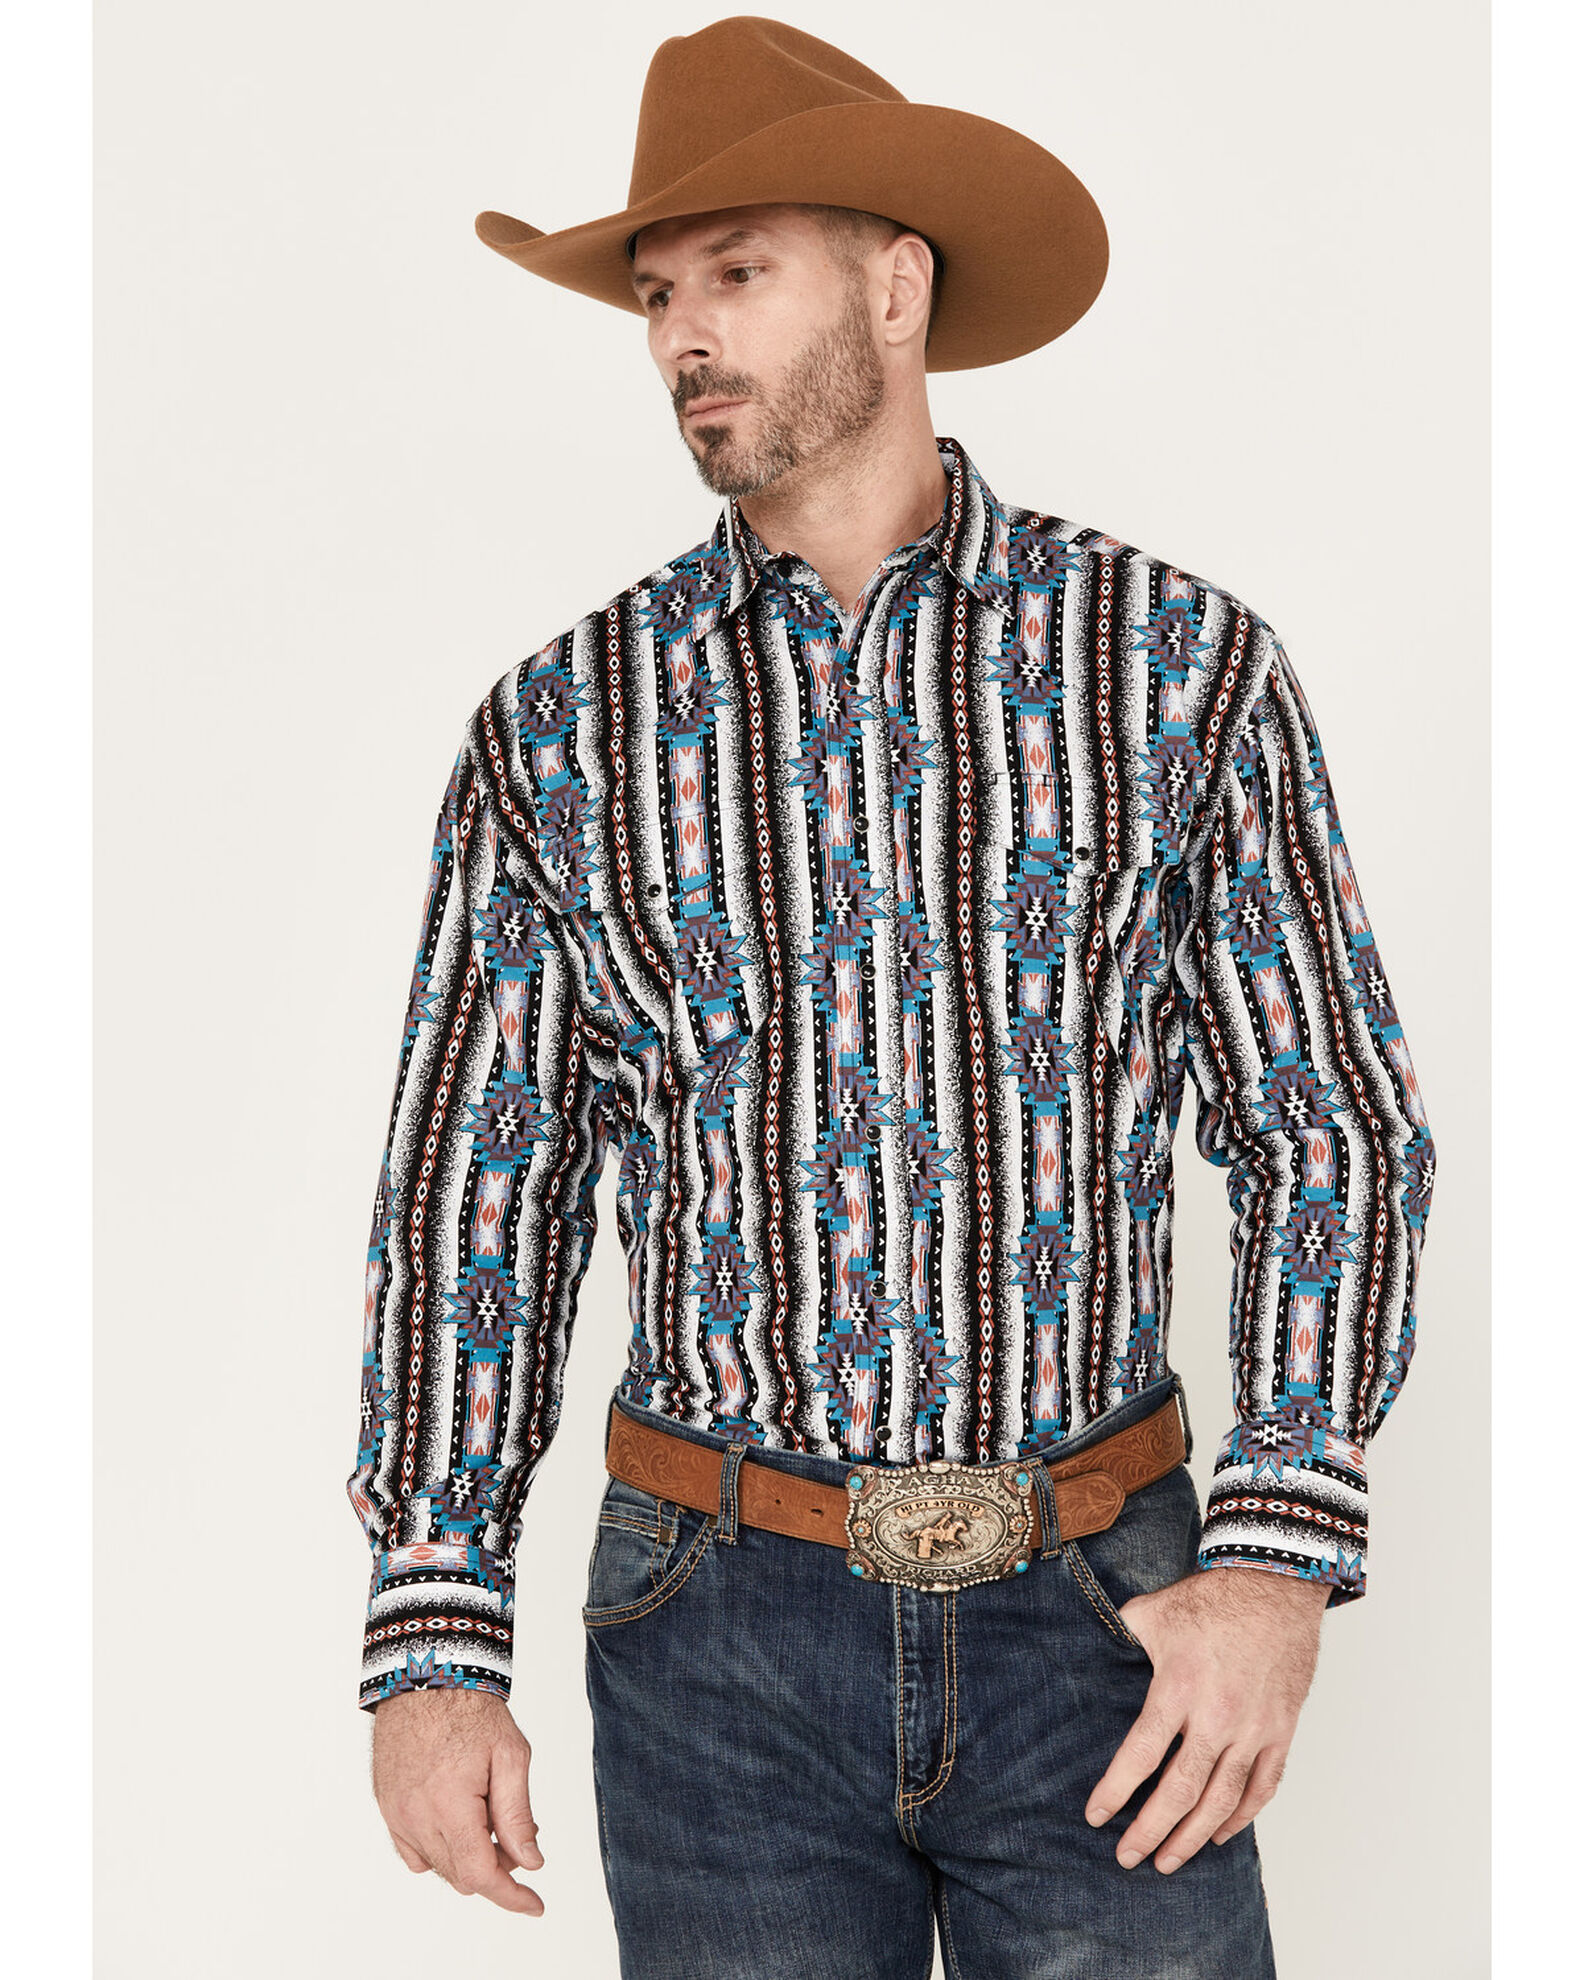 Mens-flannel-shirts-long-sleeve